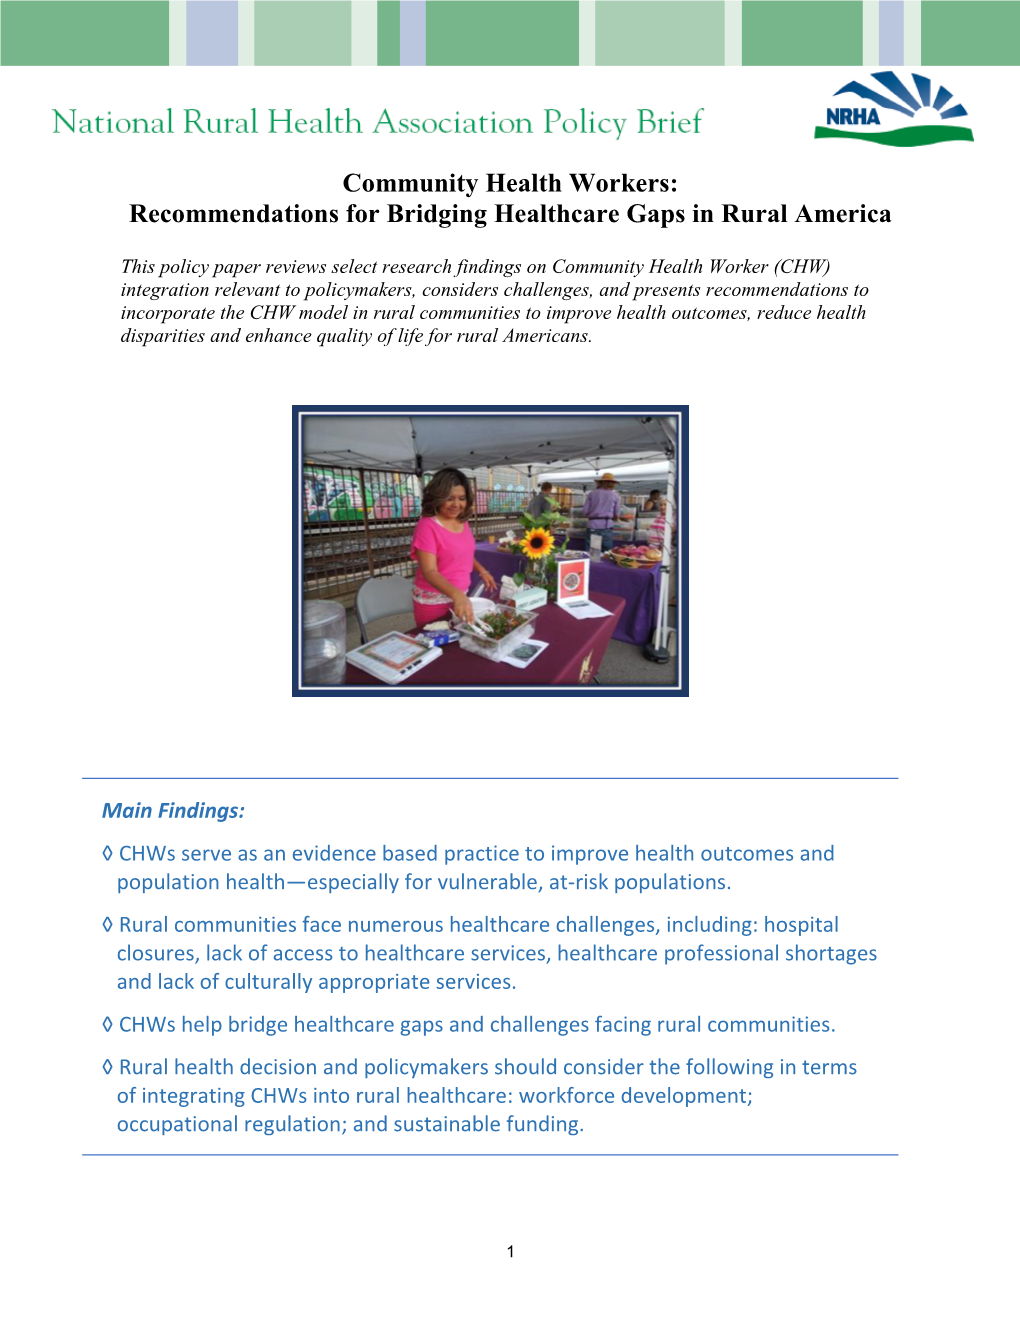 Recommendations for Bridging Healthcare Gaps in Rural America